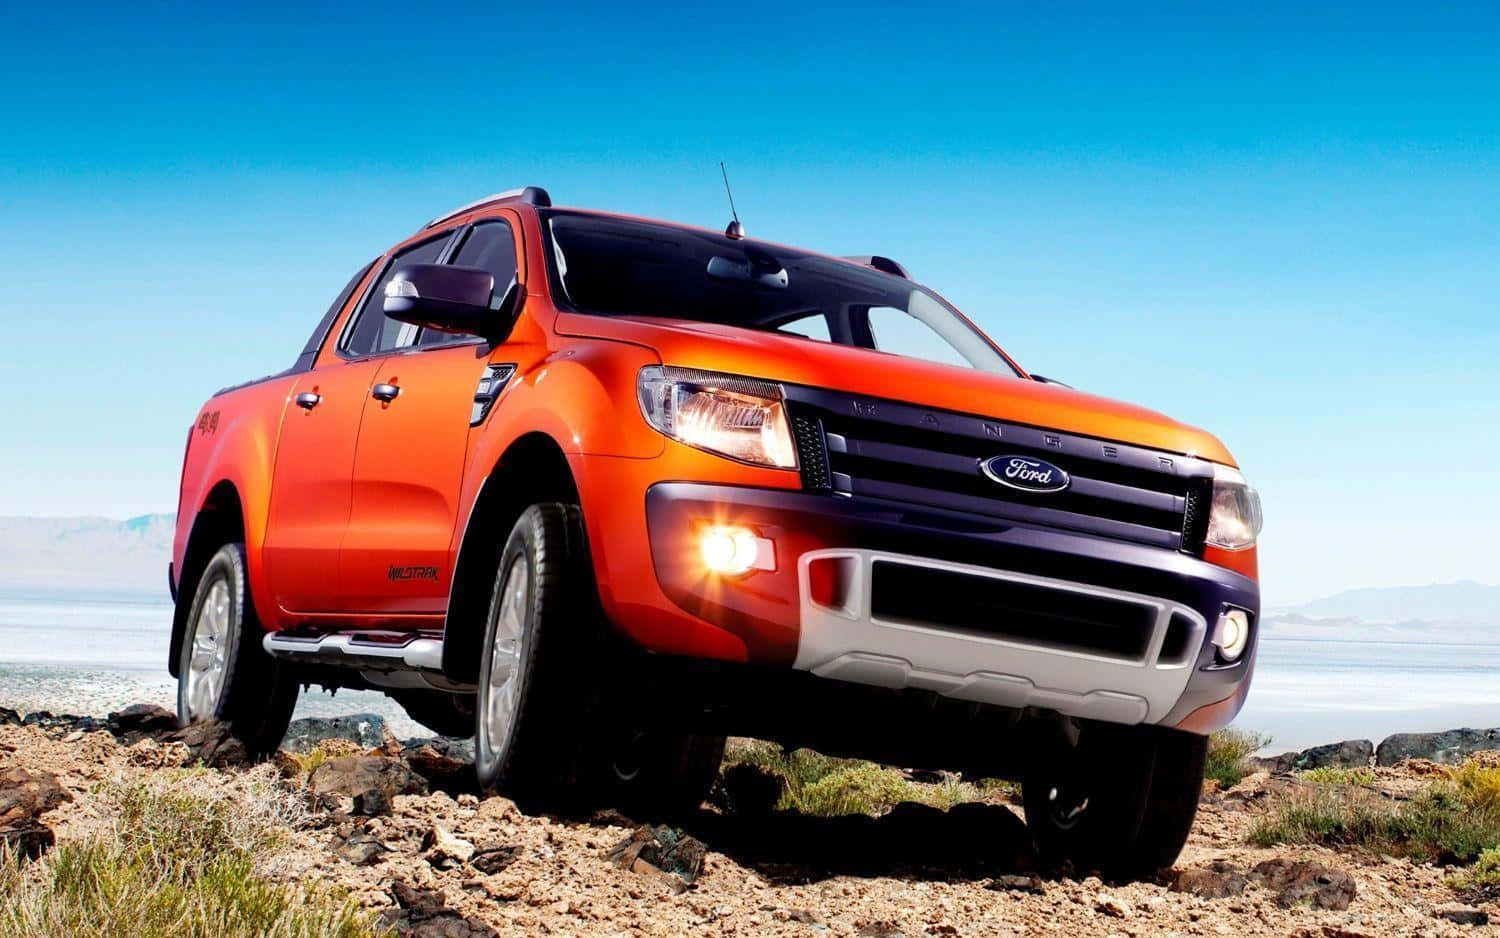 The All-New Ford Ranger Pickup Dominating the Road Wallpaper